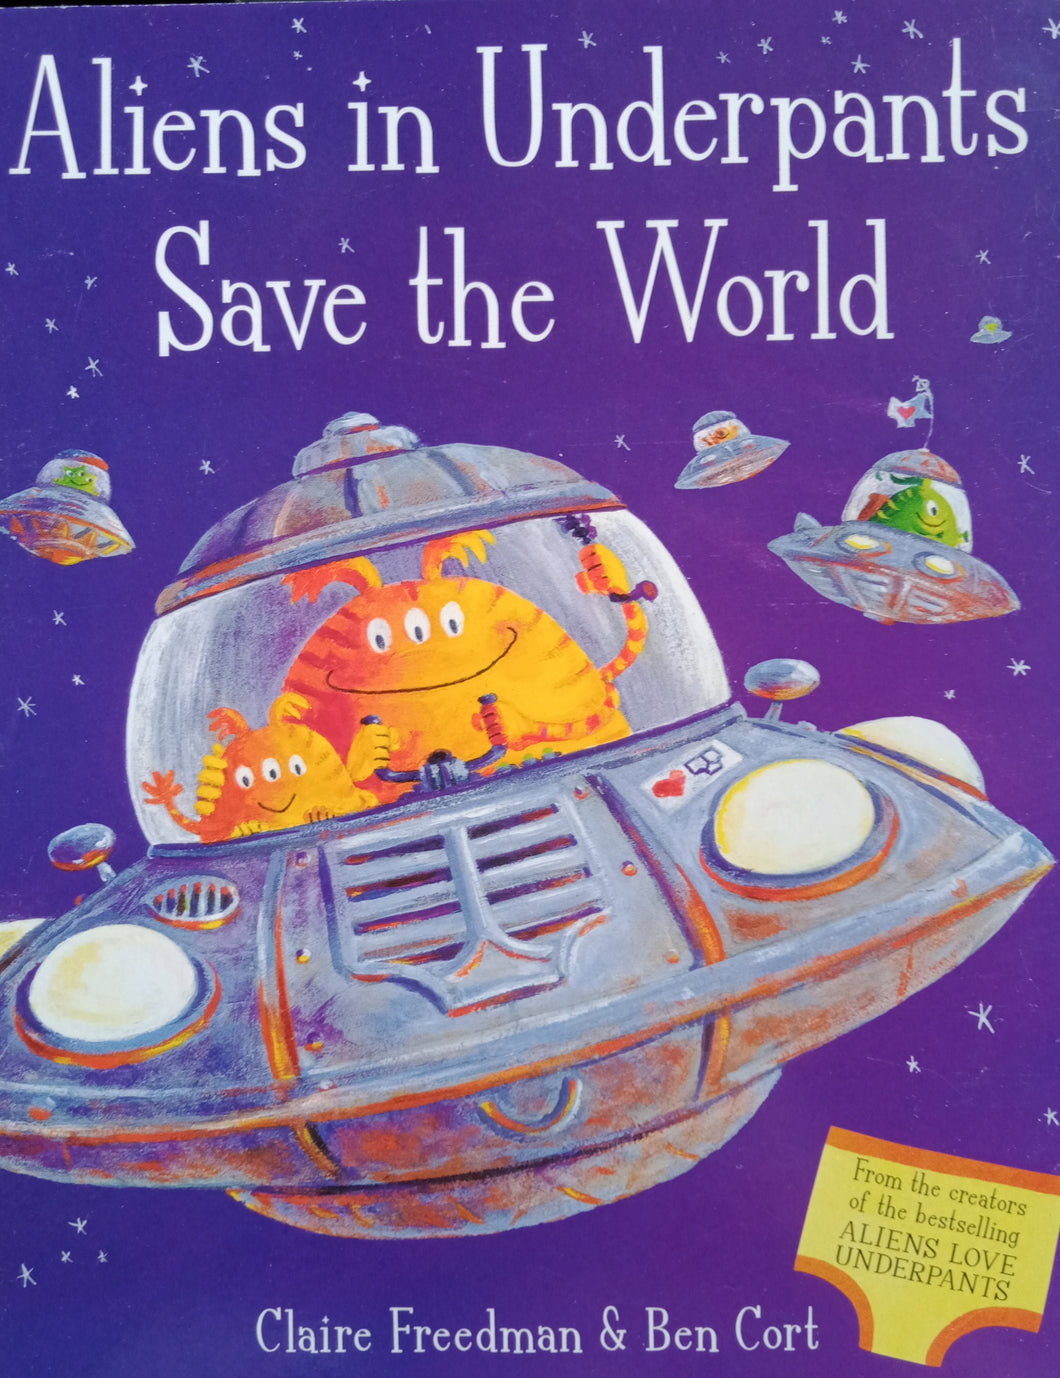 Aliens In Underpants Save The World By: Claire Freedman & Ben Cort